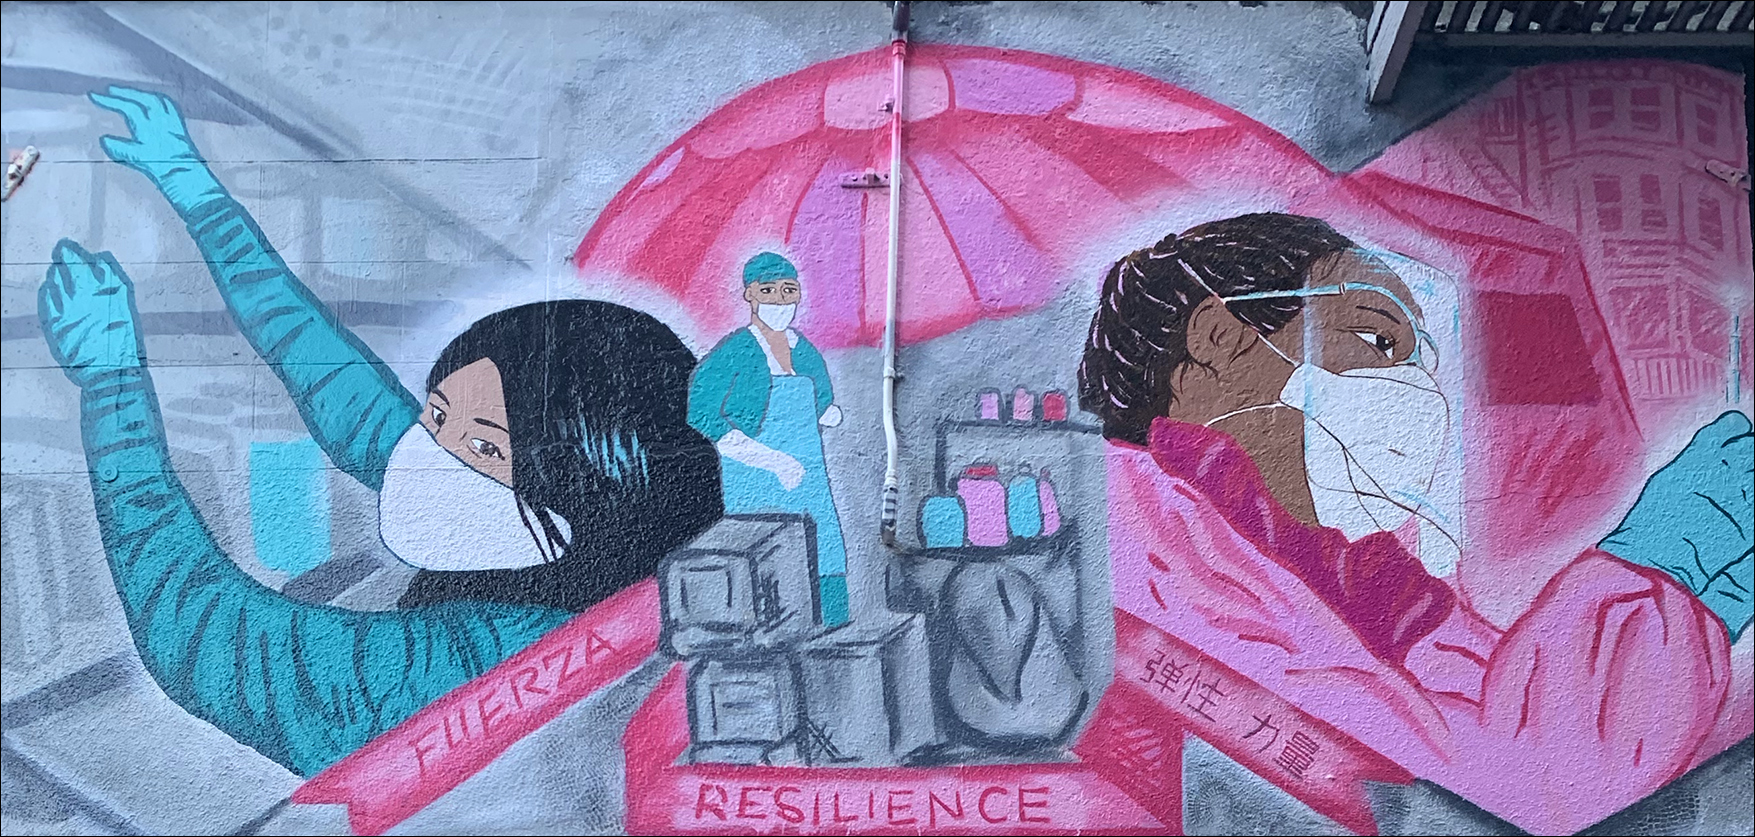 Resilience by Aysia Tiger, Melody Sandoval, Jessica Yu, Poppy Gallegos-Zingarelli, Shakty Angeles, and Mariana Rodriguez - Clarion Alley Mural Project 2021